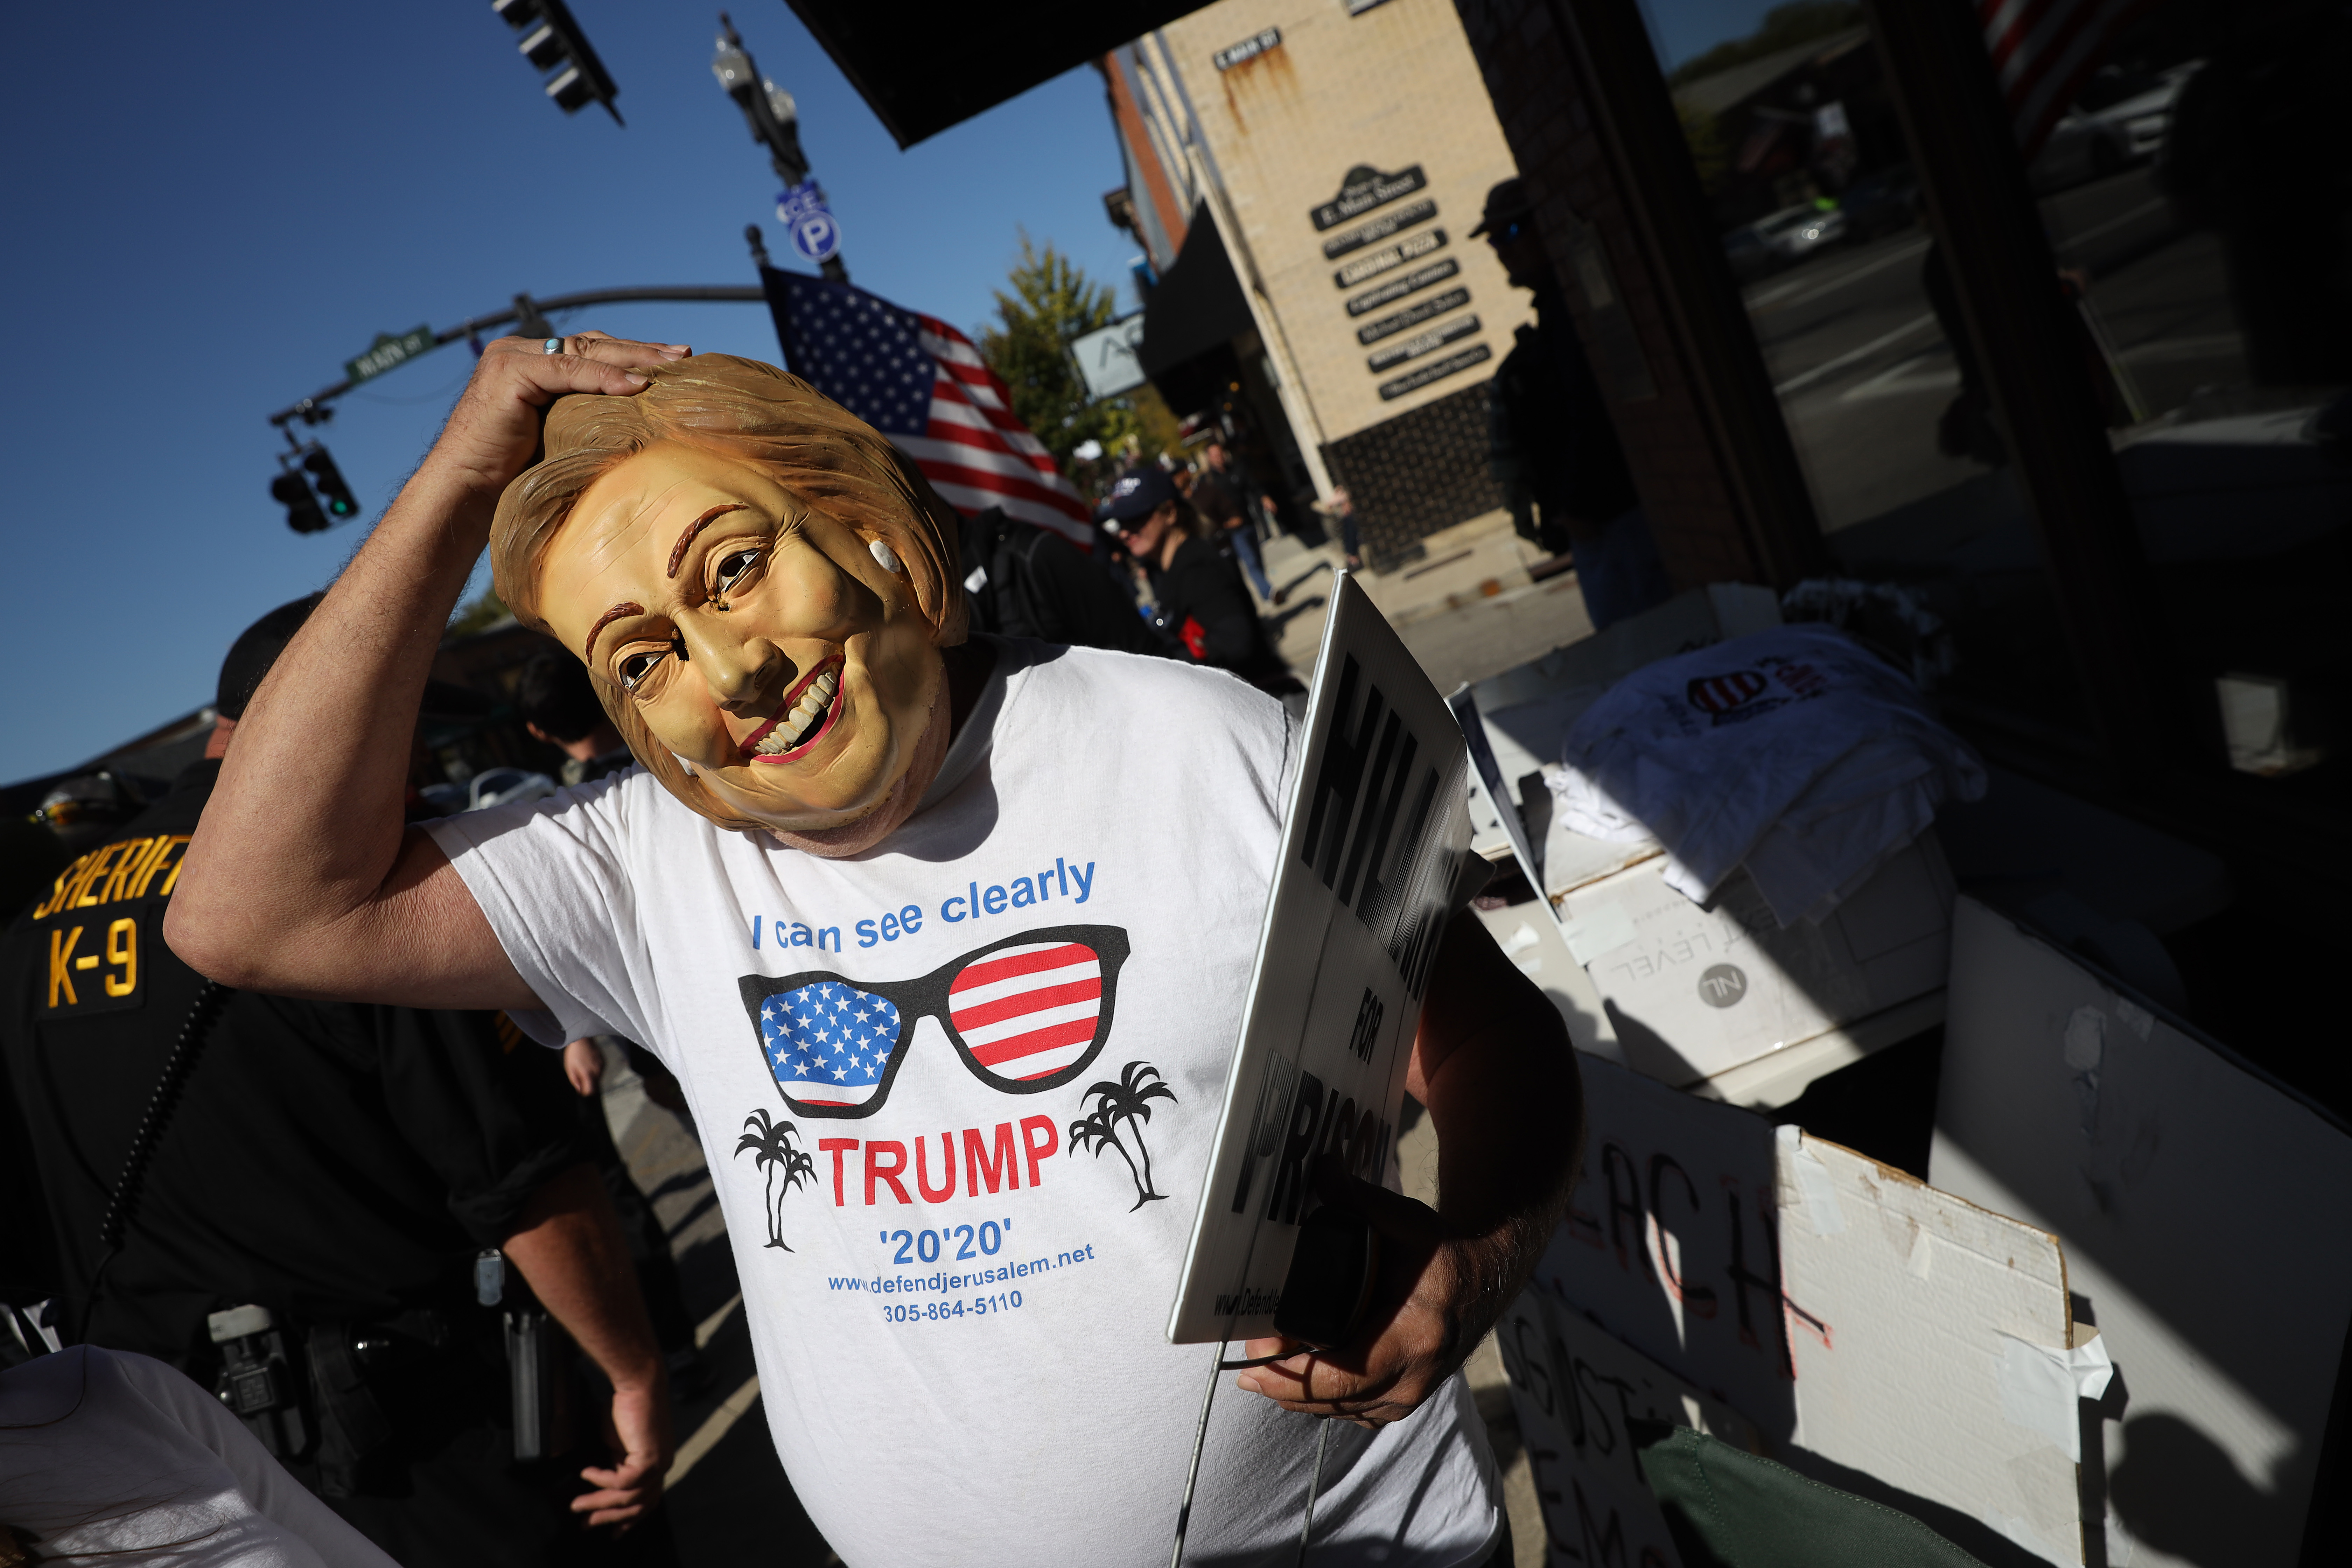 Supporters of US President Trump and gun rights supporters demonstrate in downtown Westerville, site of this evening’s Democratic presidential debate, on Oct. 15, 2019 in Westerville, Ohio.  